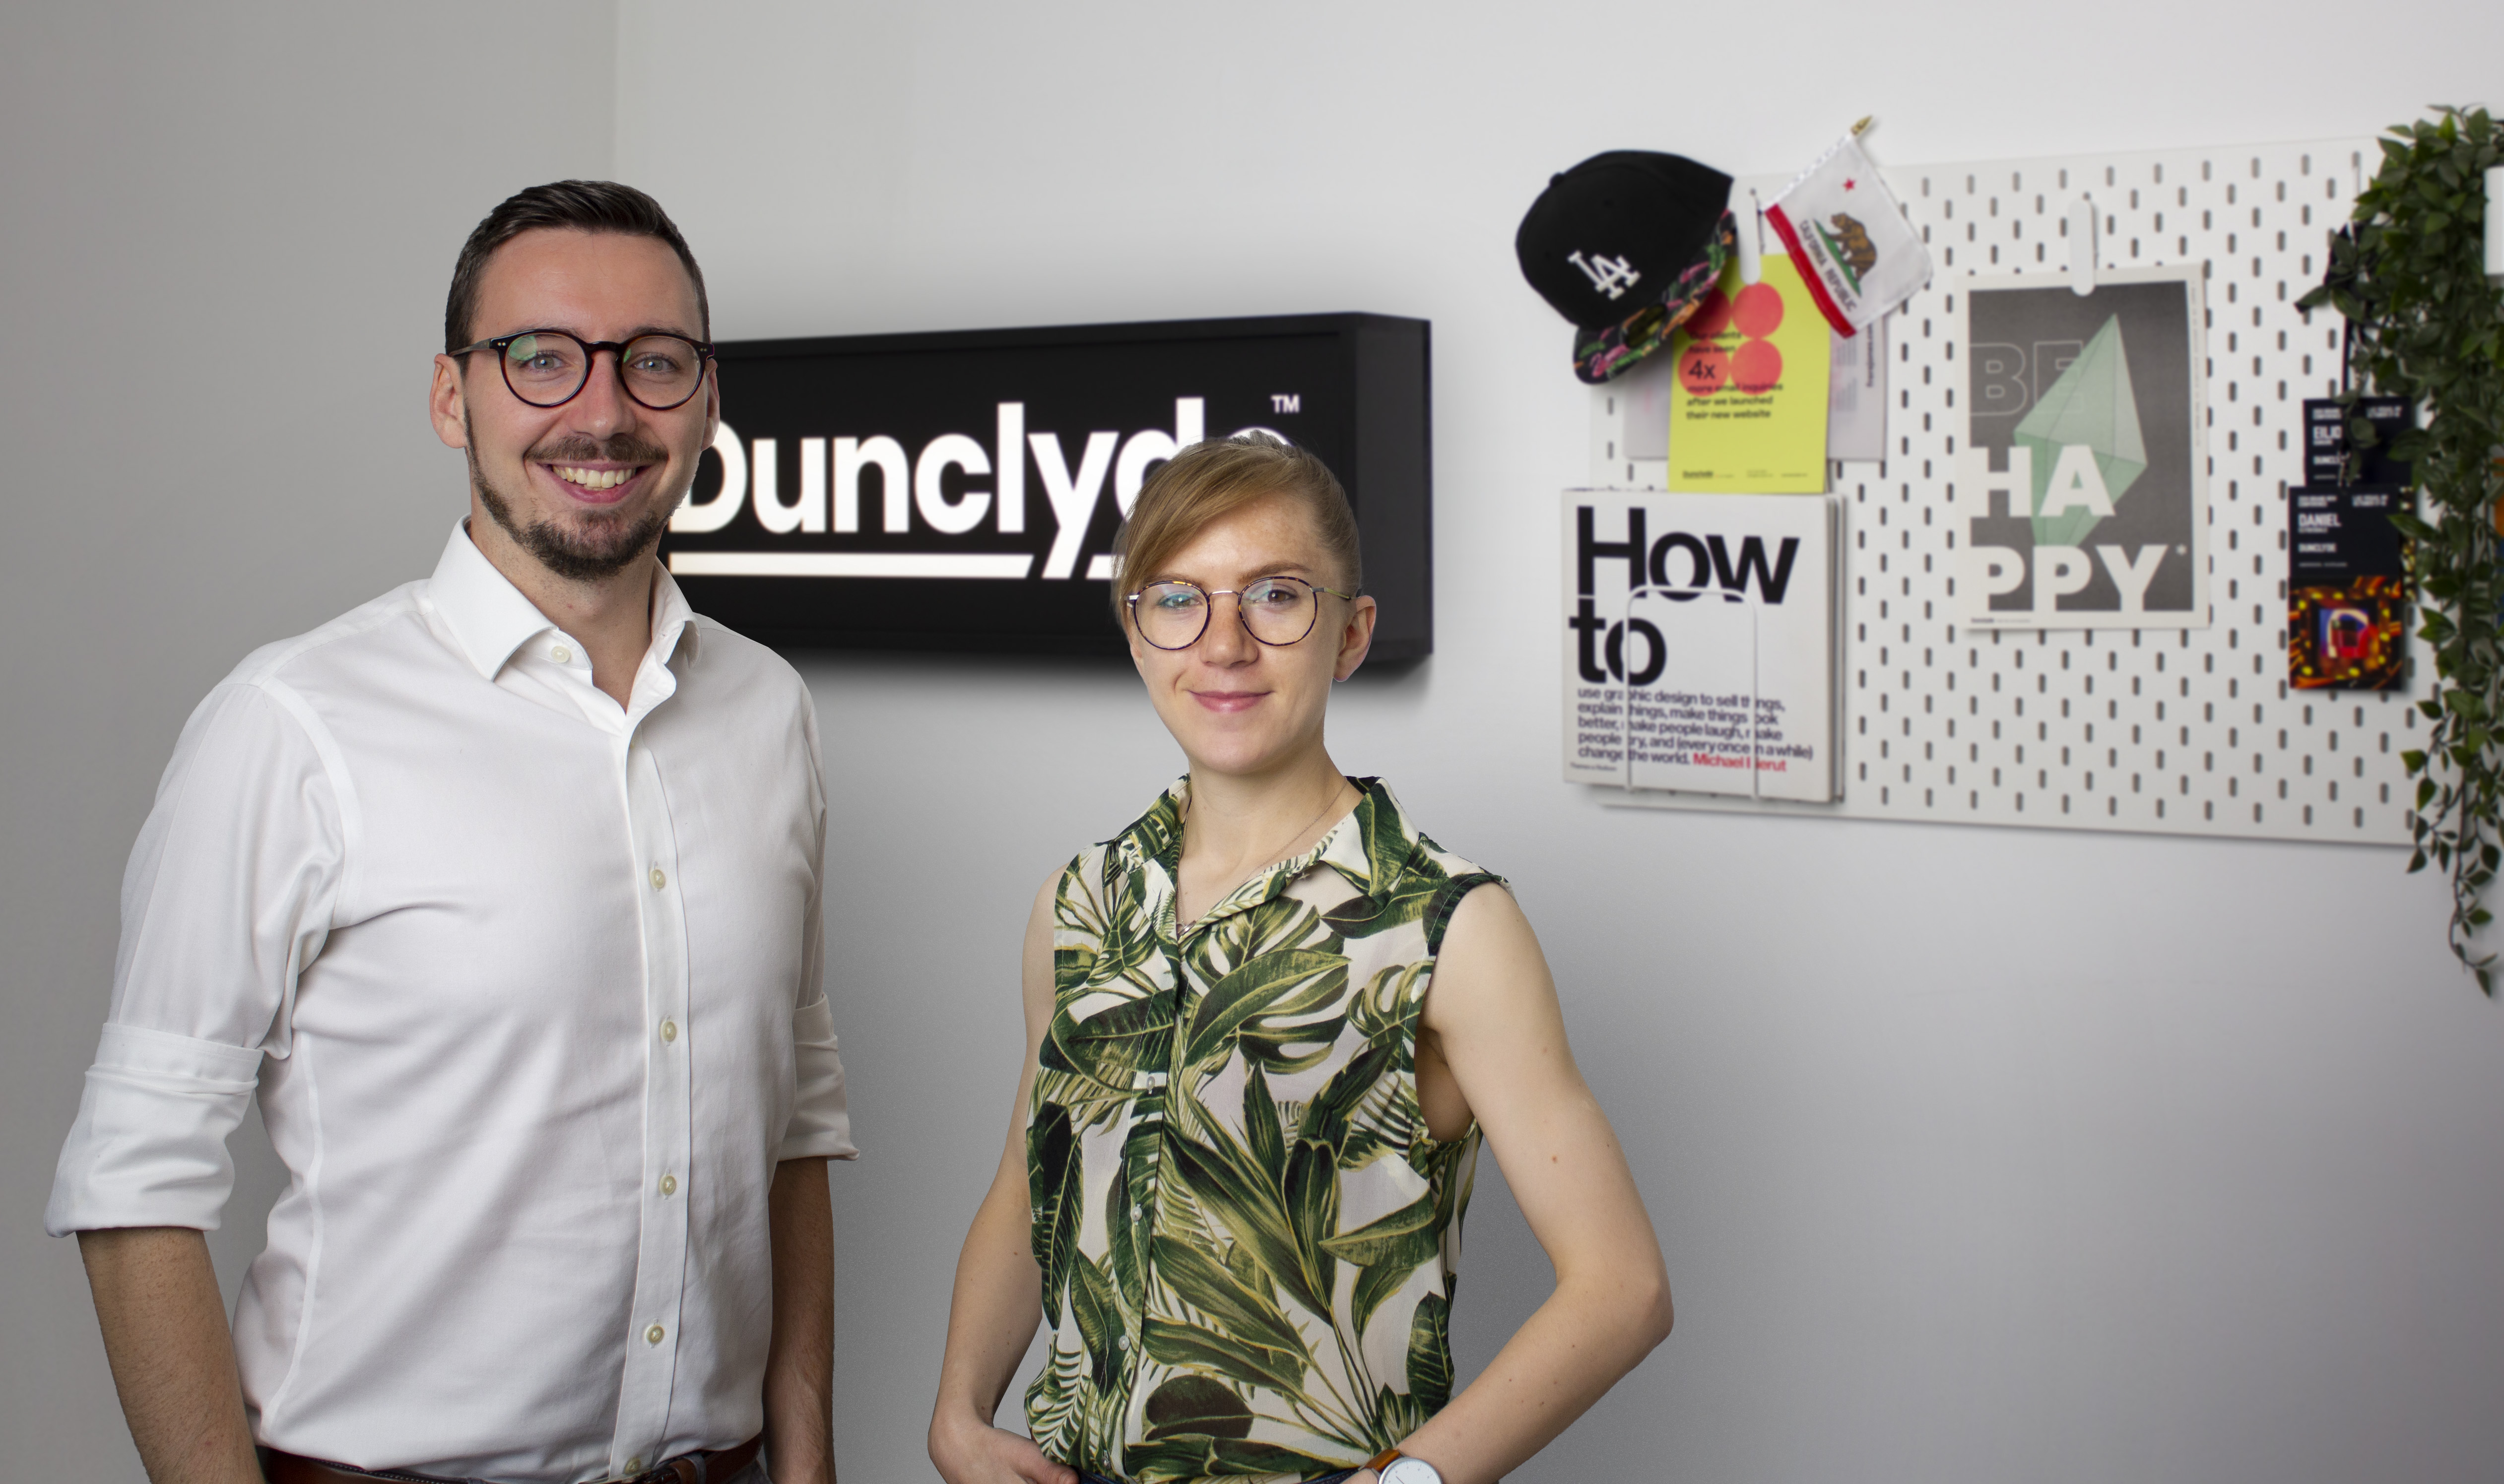 Aberdeen-based creative design agency Dunclyde opens Los Angeles office